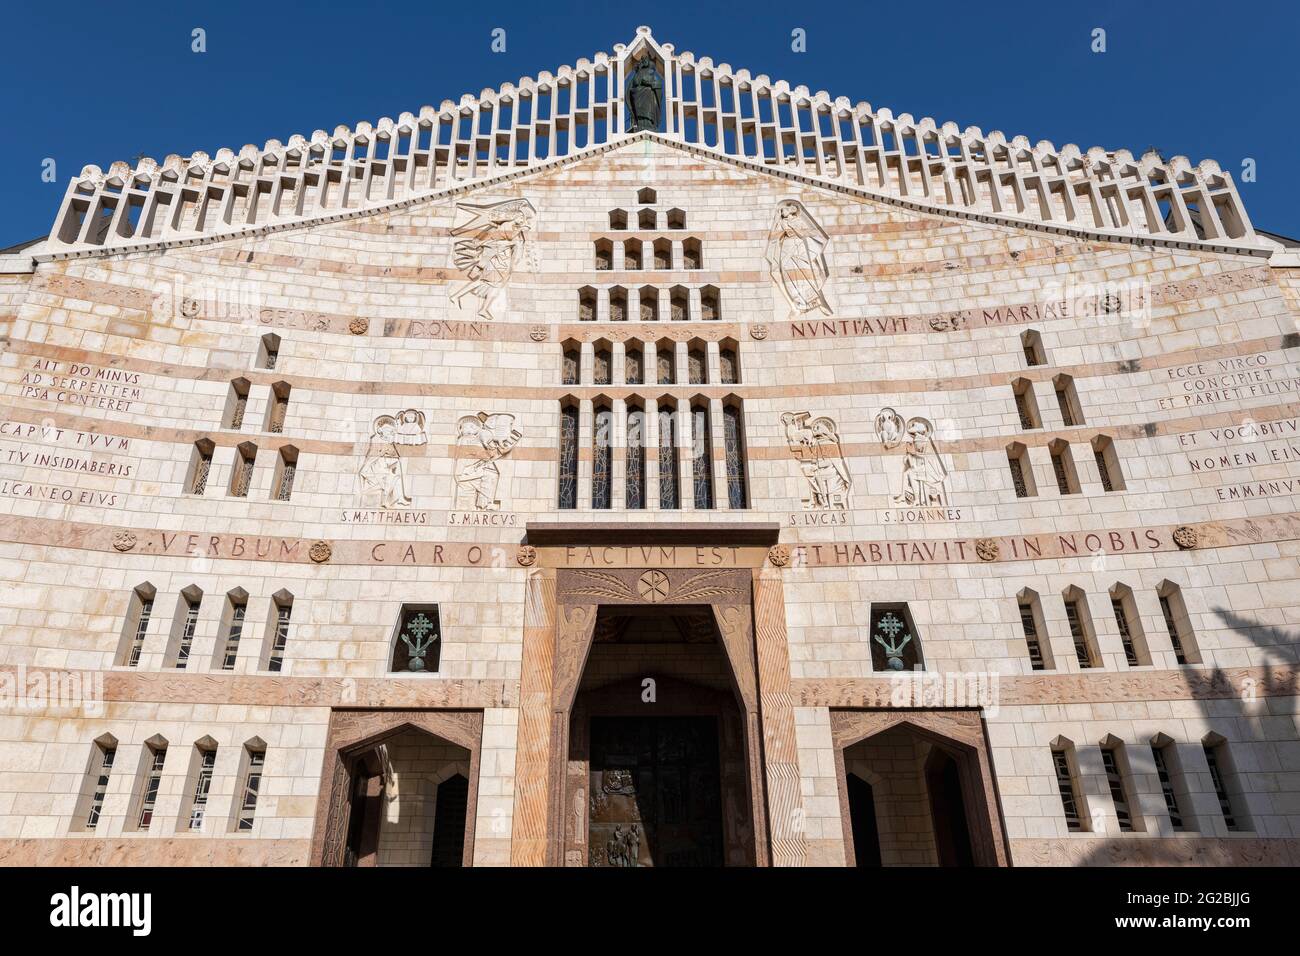 Western facade of the Church of the Annunciation  also referred to as the Basilica of the Annunciation, is a Catholic Church in Nazareth. Israel Stock Photo